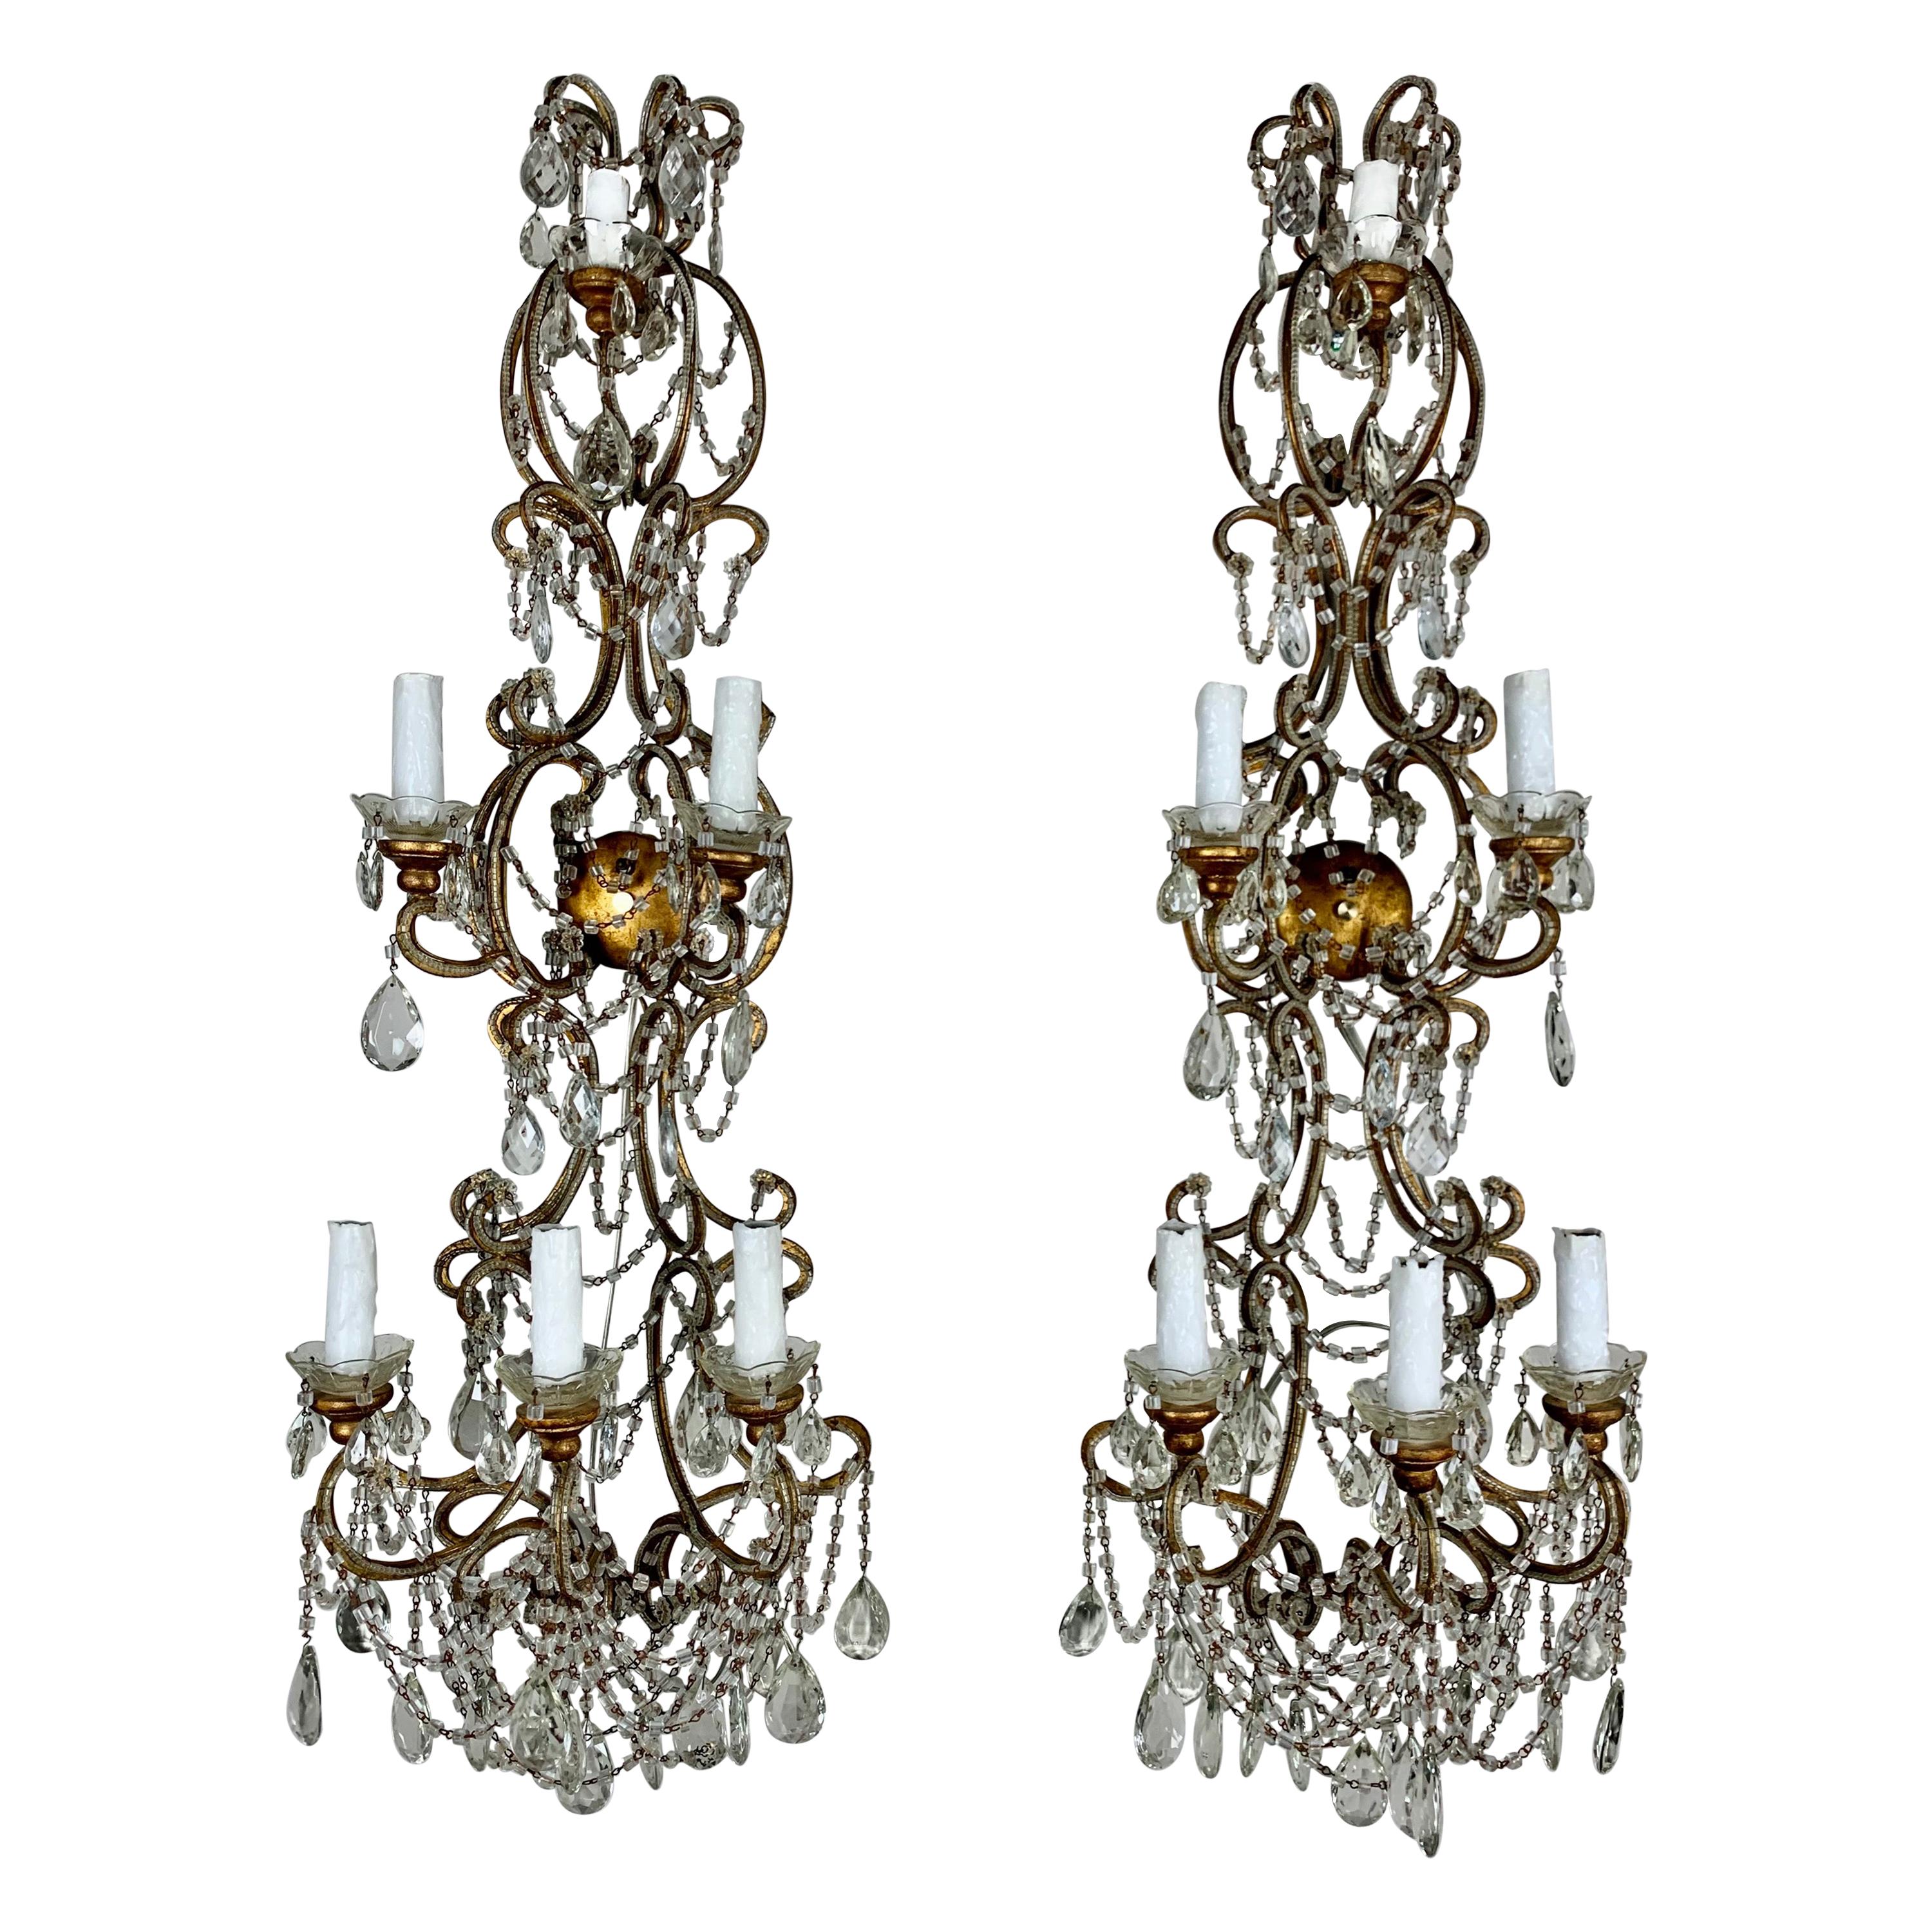 Pair of French Beaded 6-Light Sconces, C. 1940